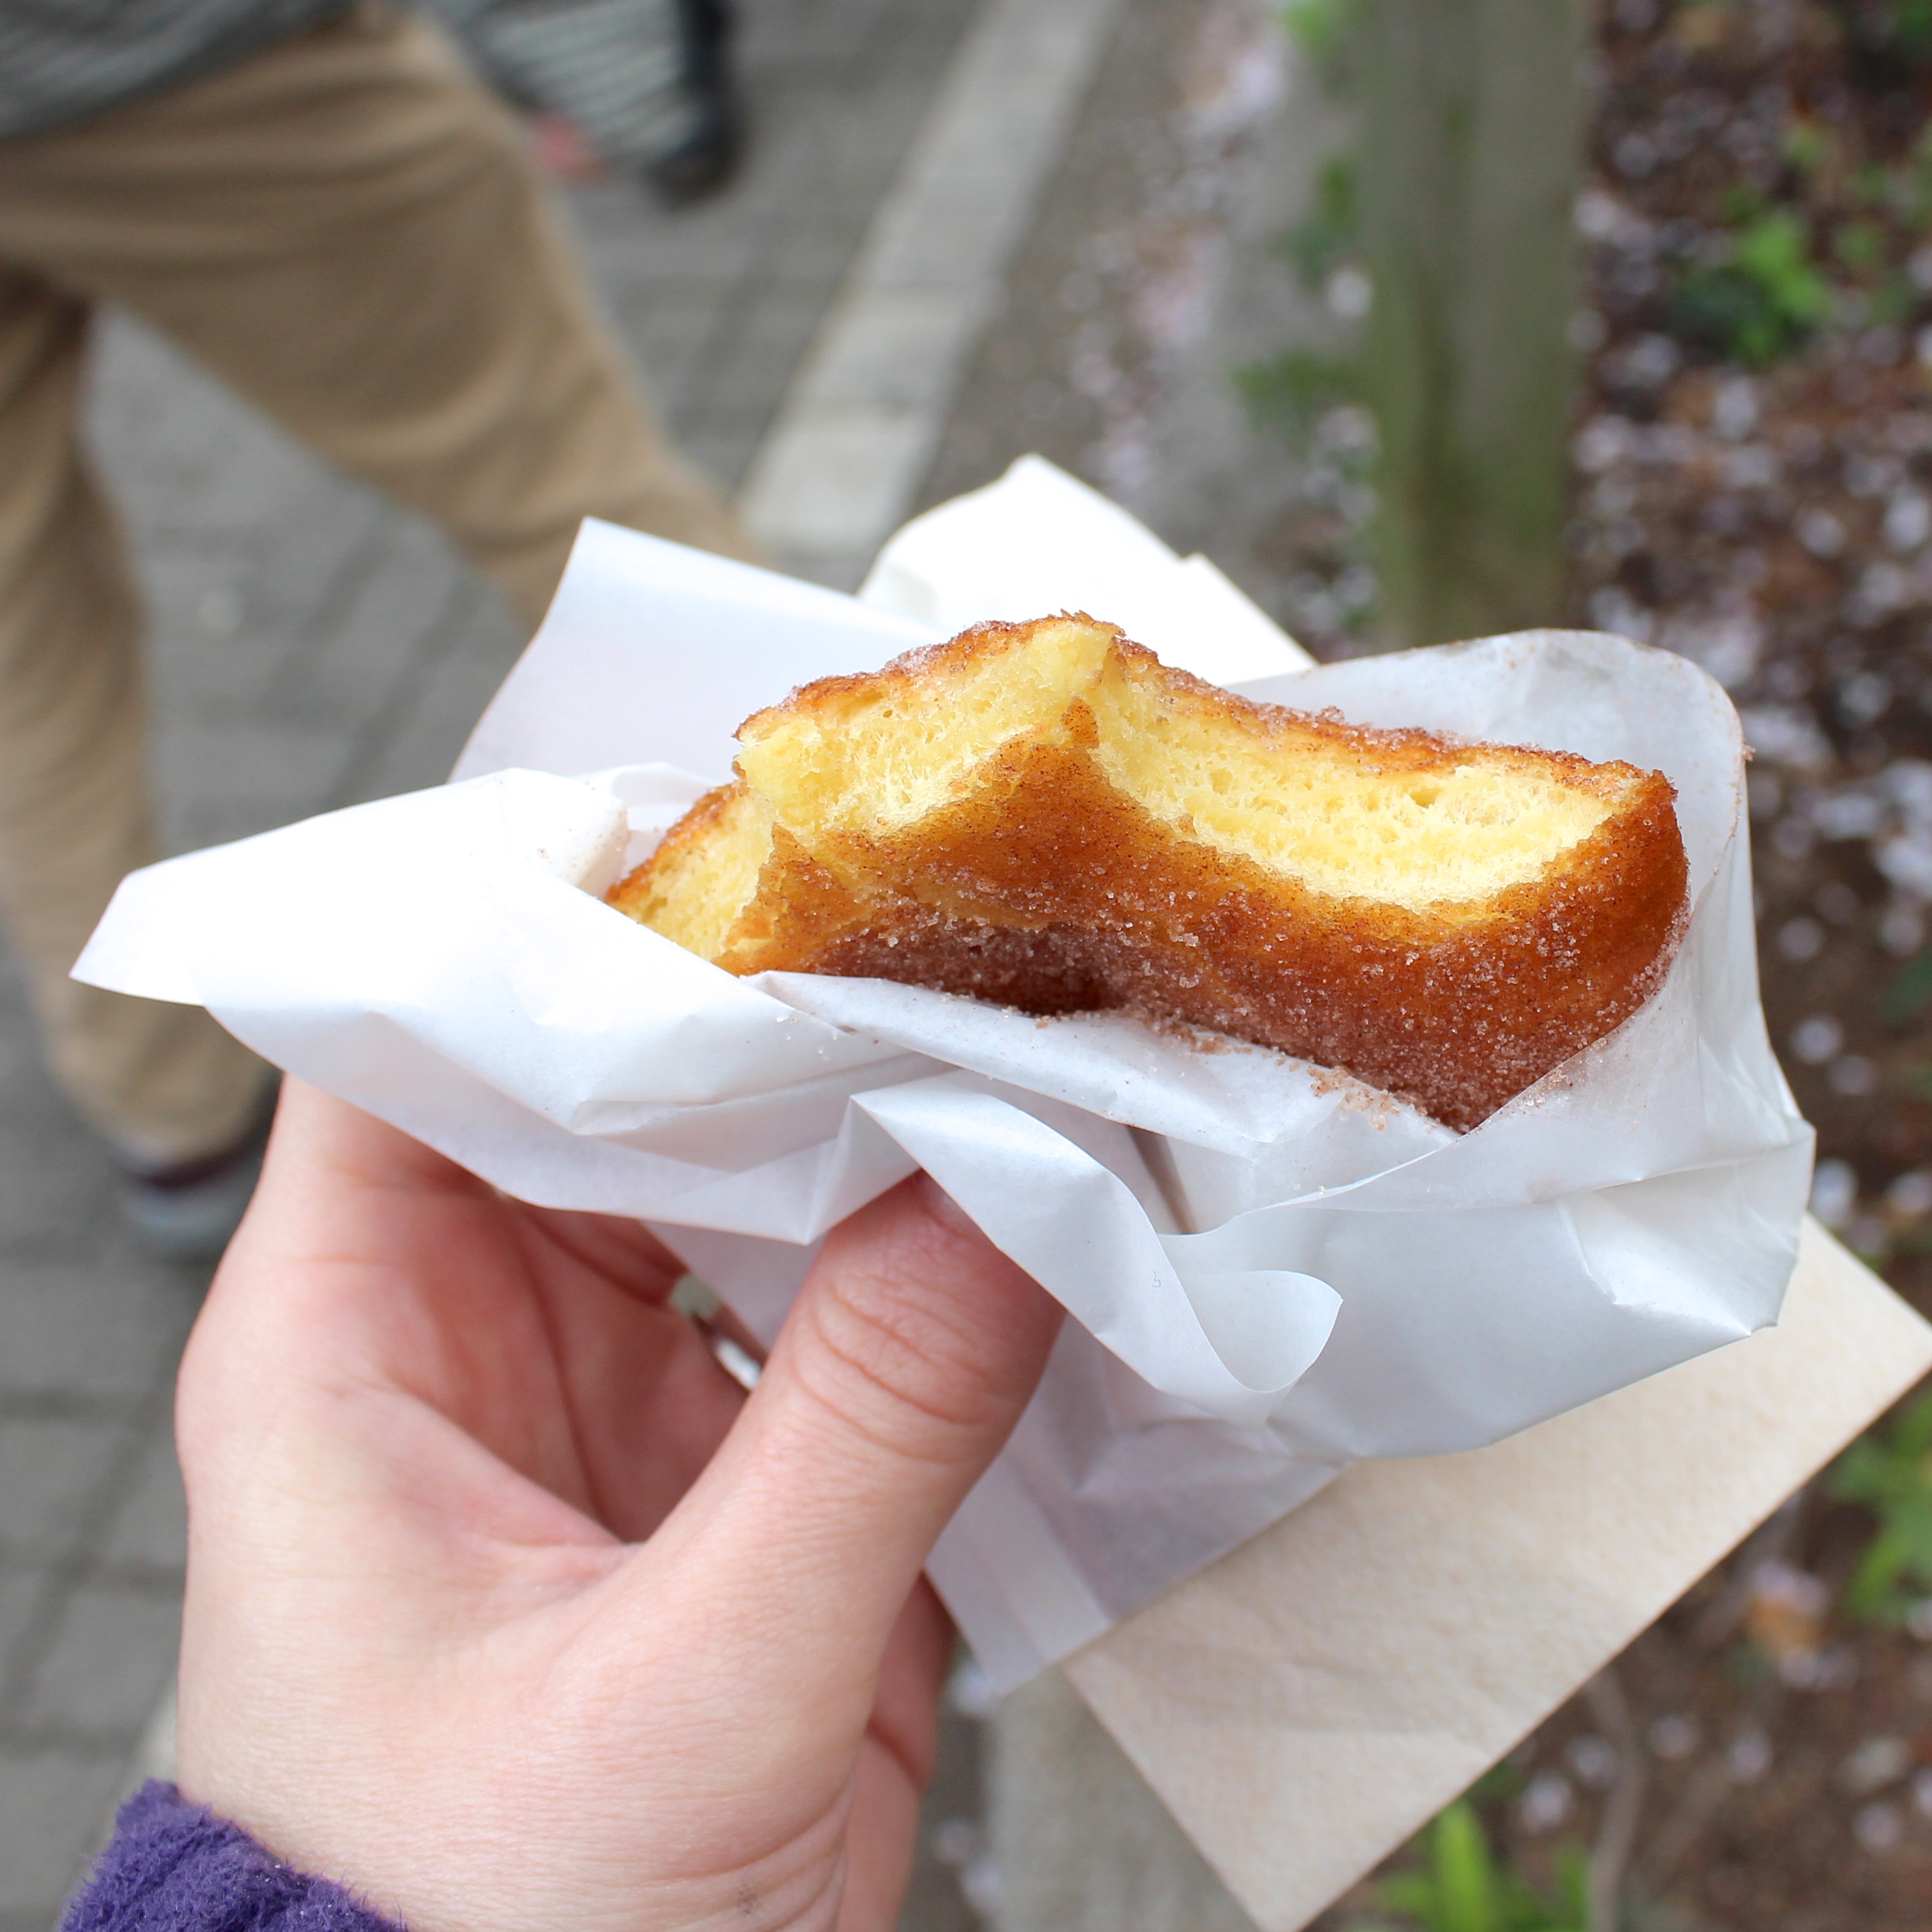 A festival classic anywhere in the world, fried dough! This one had a cinnamon-sugar coating.